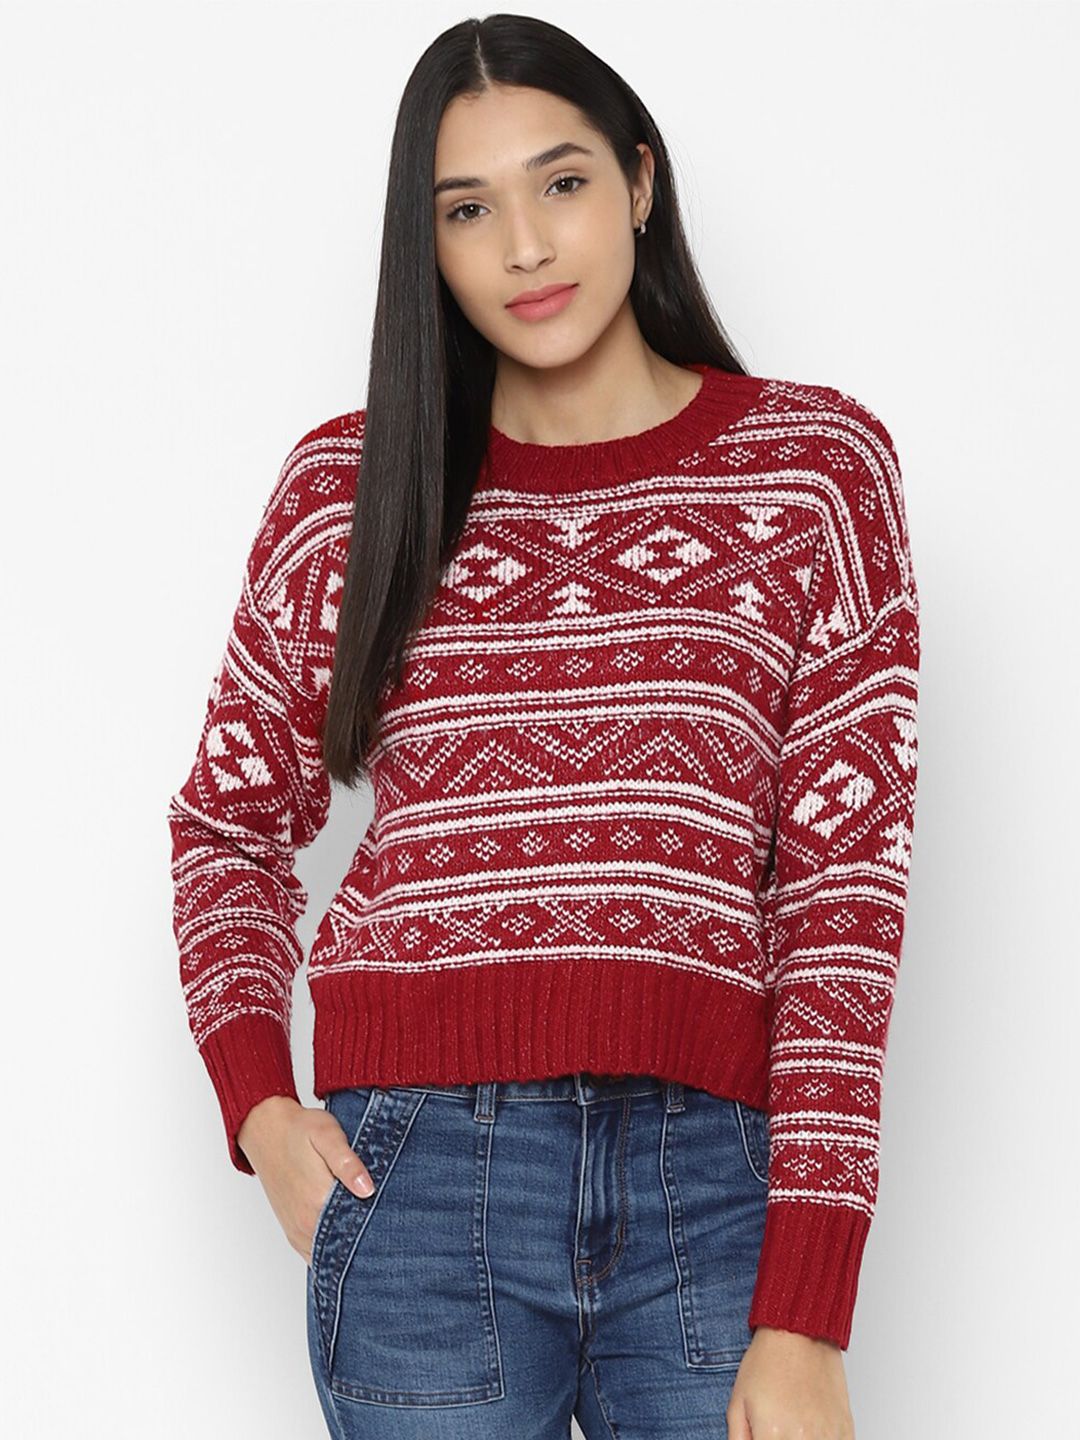 AMERICAN EAGLE OUTFITTERS Women Red Self Design Round Neck Sweater Price in India